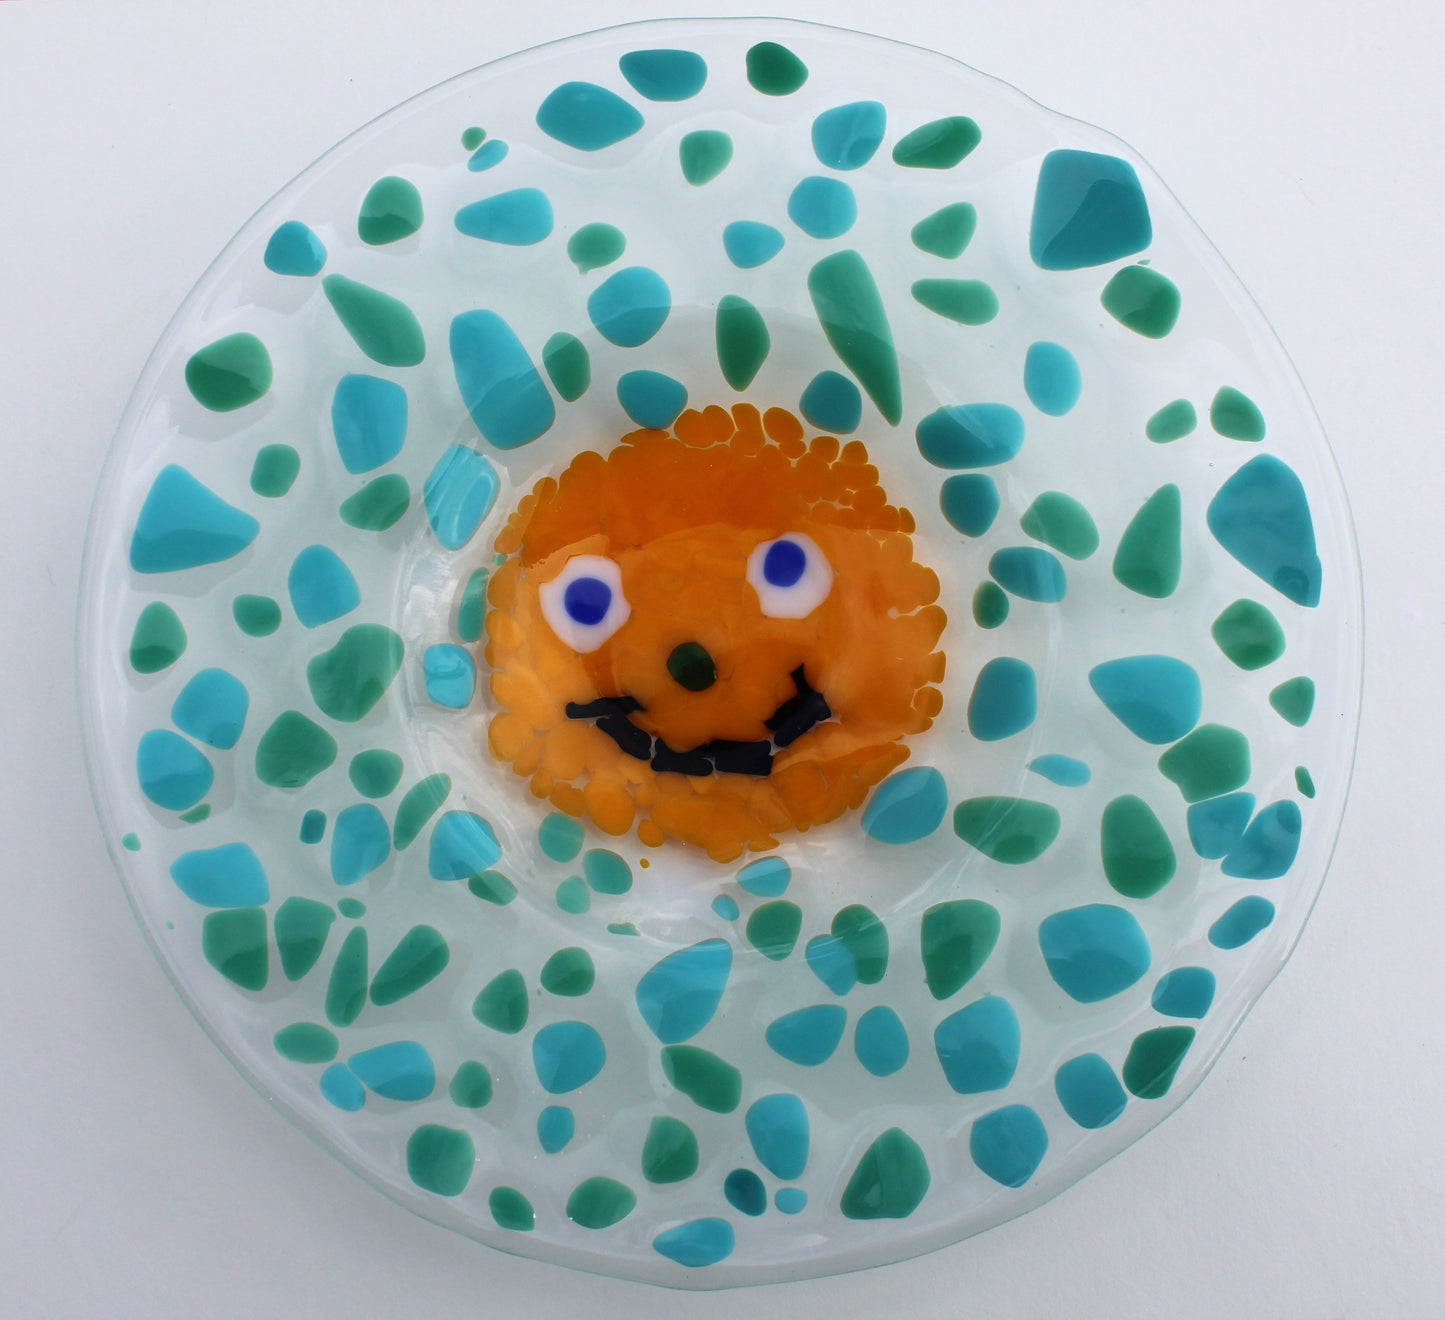 This is a round glass art piece with blue and green splothces around the 4dges. In the center there is a yellow smiley face with a black smile and blue eyes